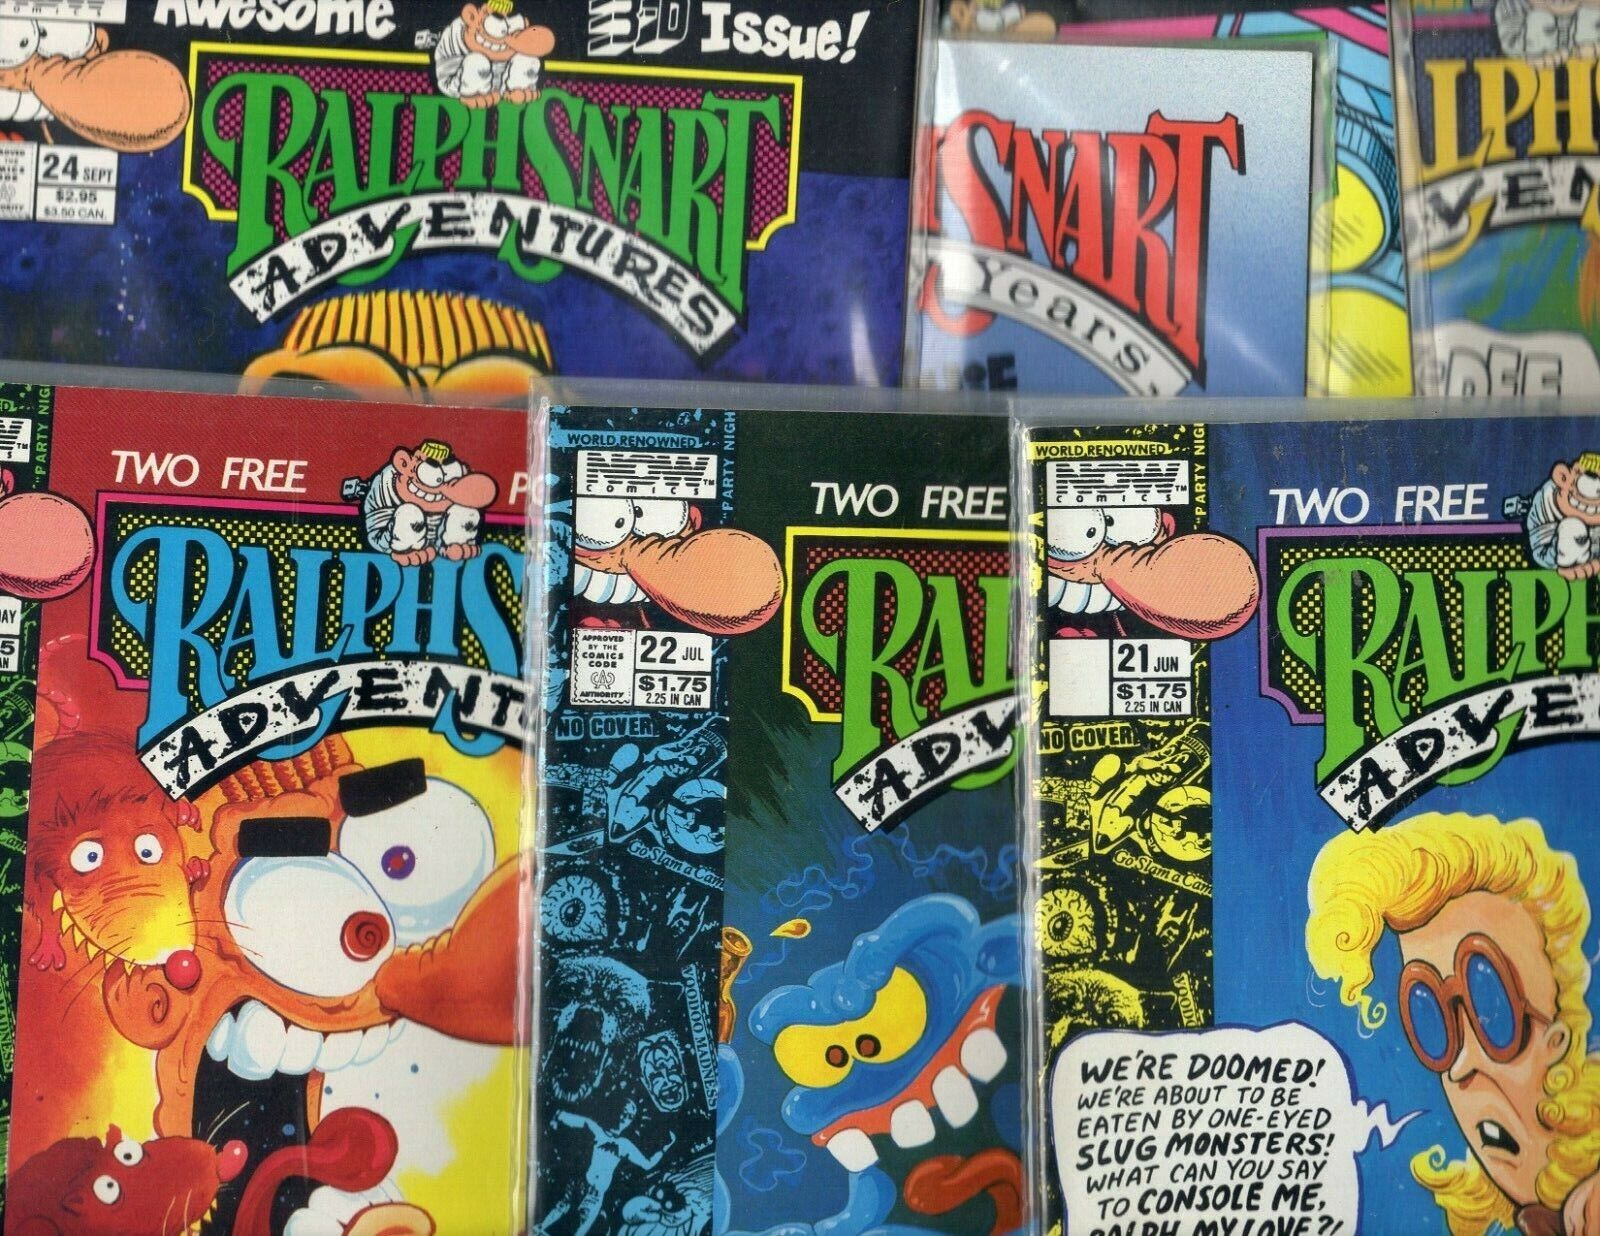 RALPH SNART ADVENTURES (Now Comics, 1990) 7 issues: 21-26 plus 3-D special #1